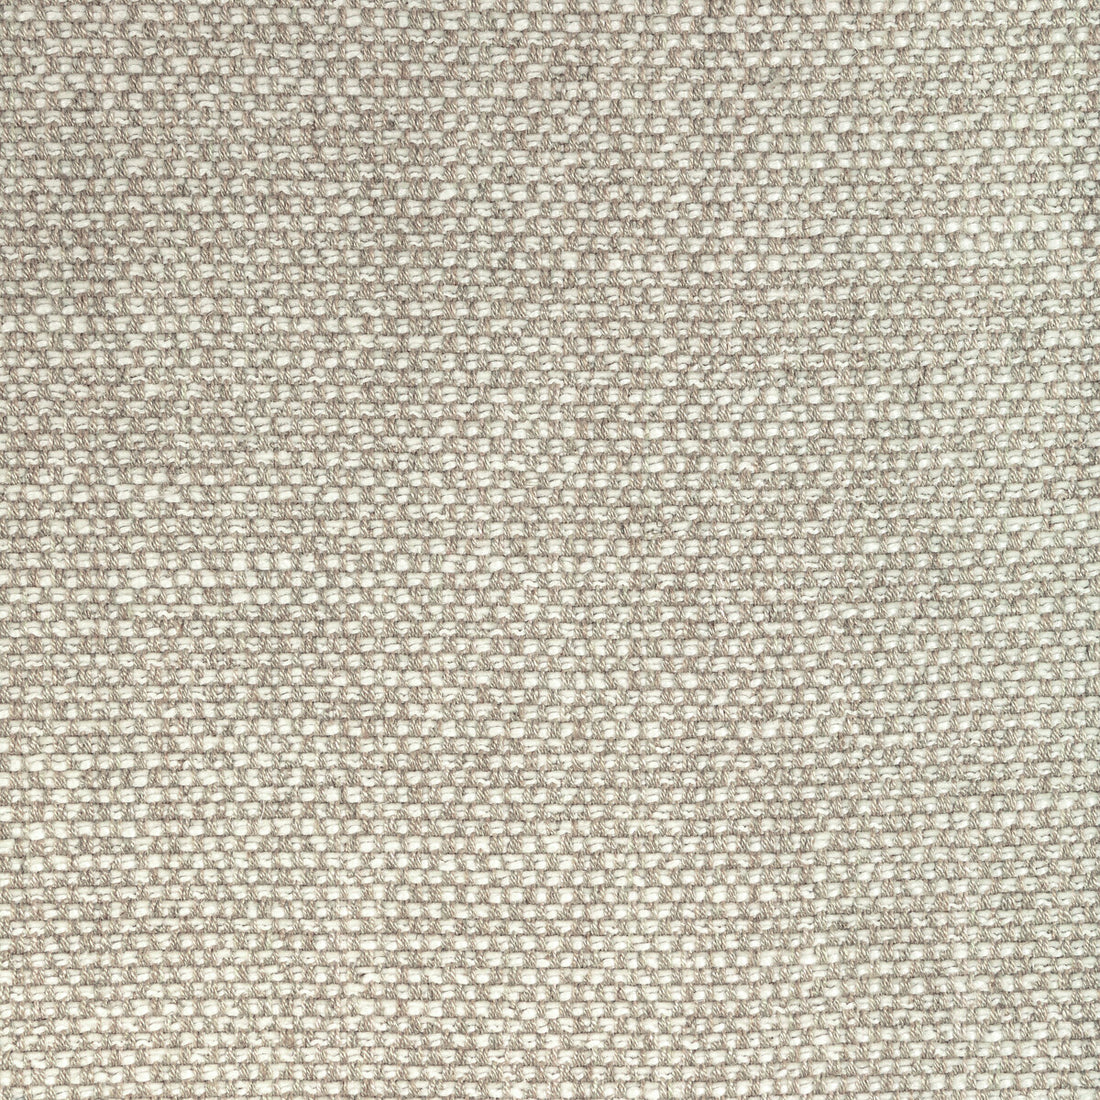 Rospico Plain fabric in dove color - pattern 8022110.11.0 - by Brunschwig &amp; Fils in the Lorient Weaves collection